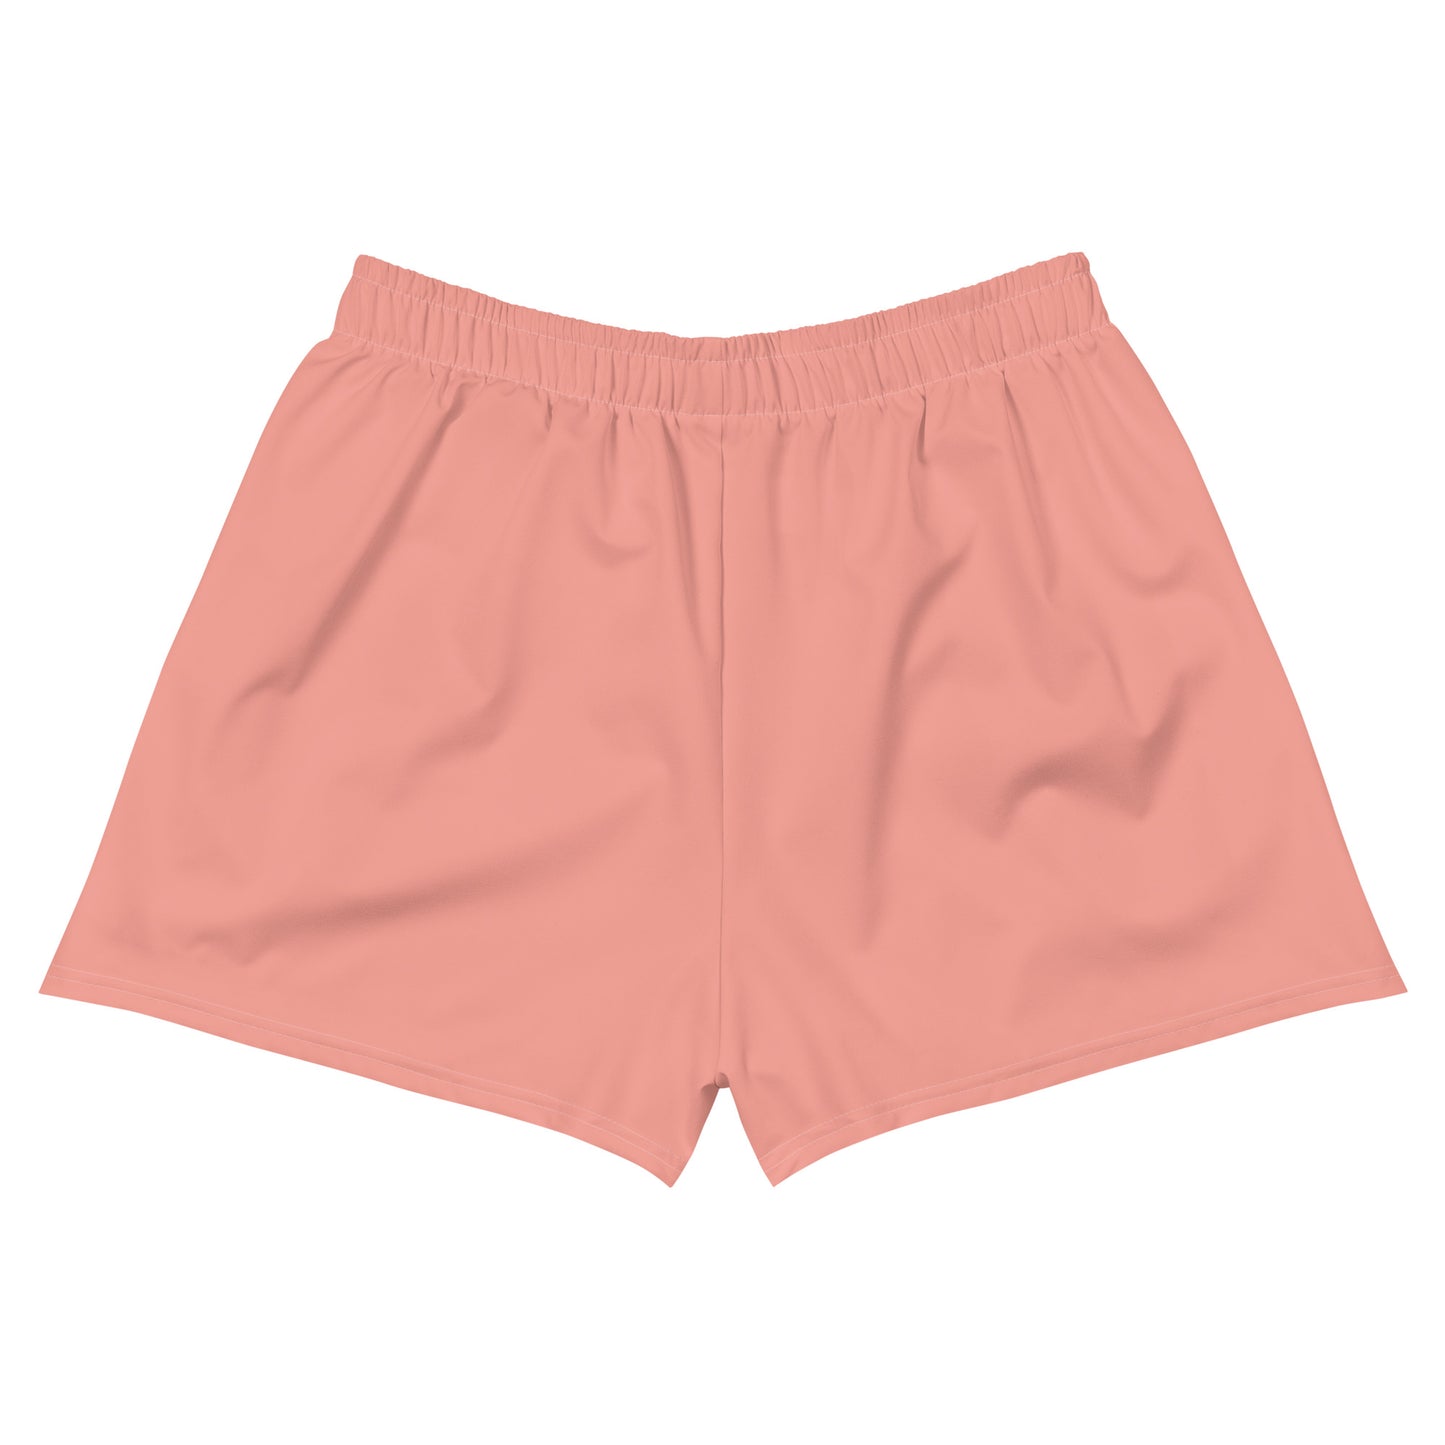 Coral Pink Climate Change Global Warming Statement - Sustainably Made Women’s Recycled Athletic Shorts